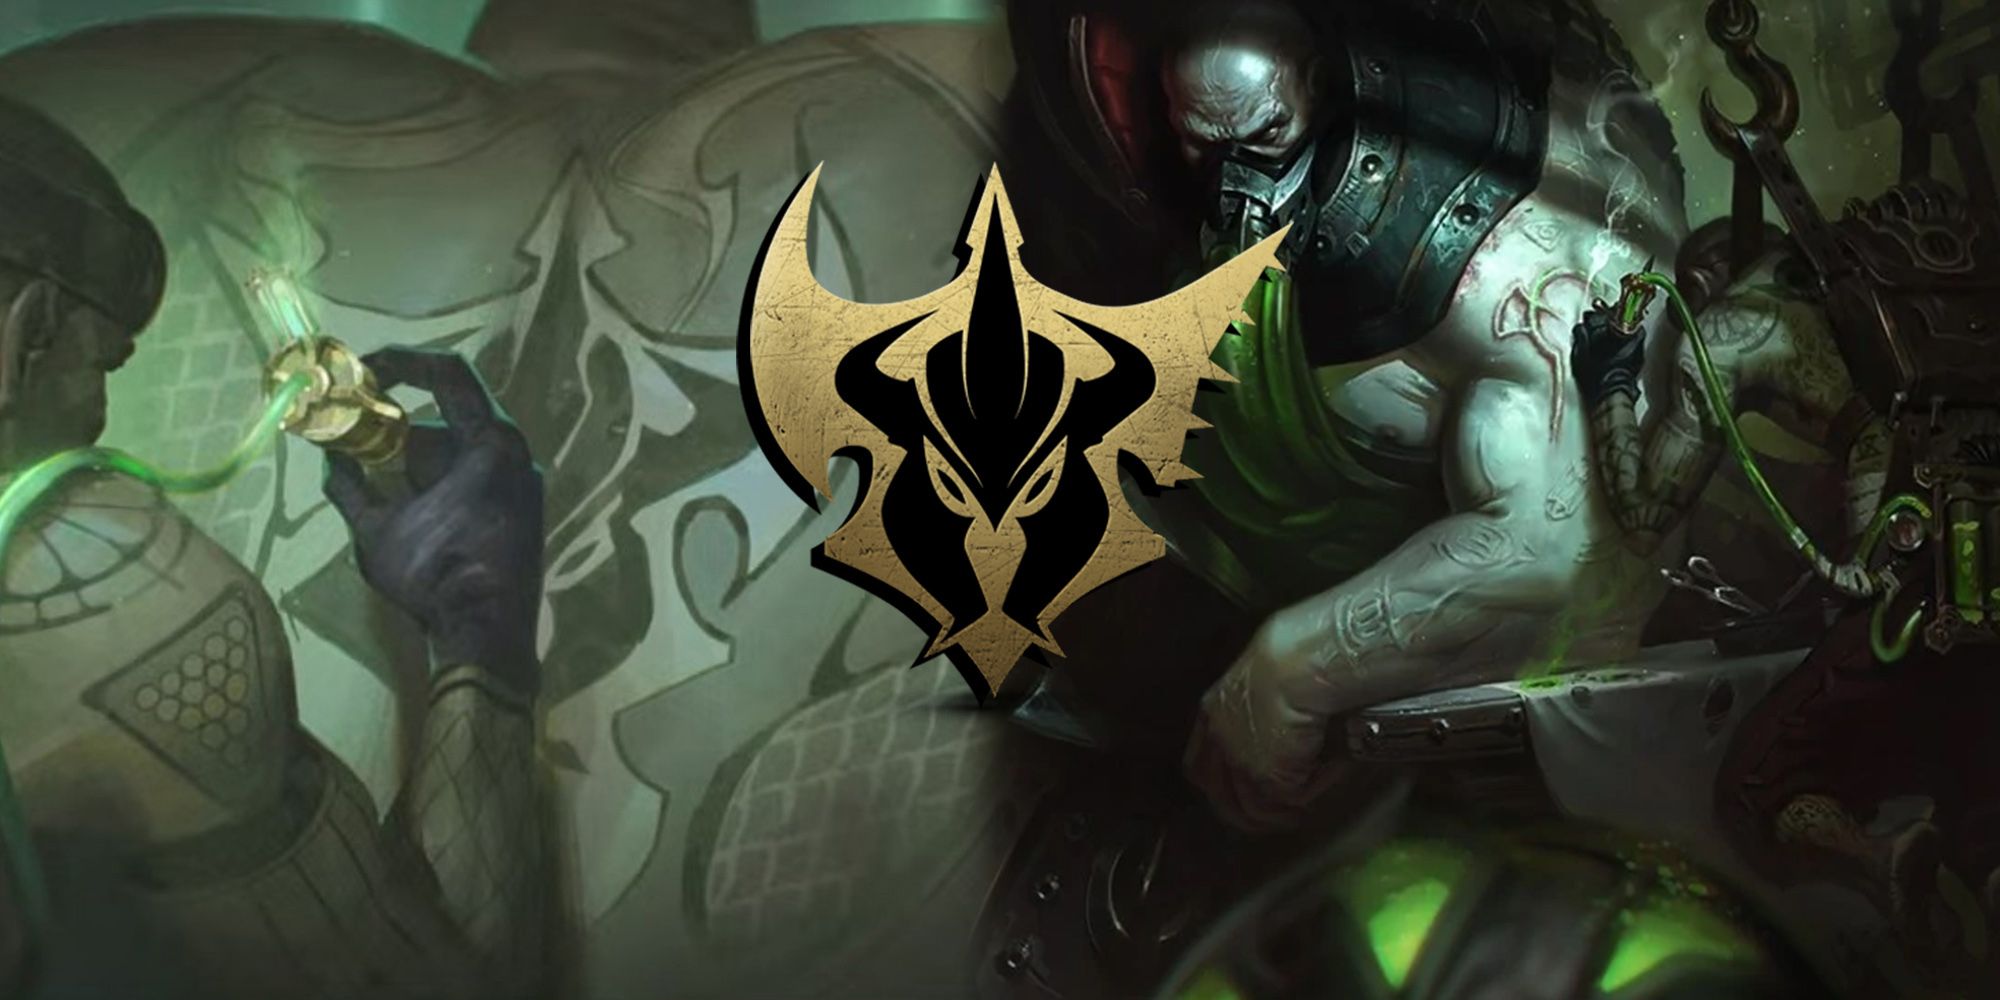 Arcane - The Man Getting The Pentakill Tattoo, Urgot Getting His Tattoos From Same Man, And The Pentakill Logo